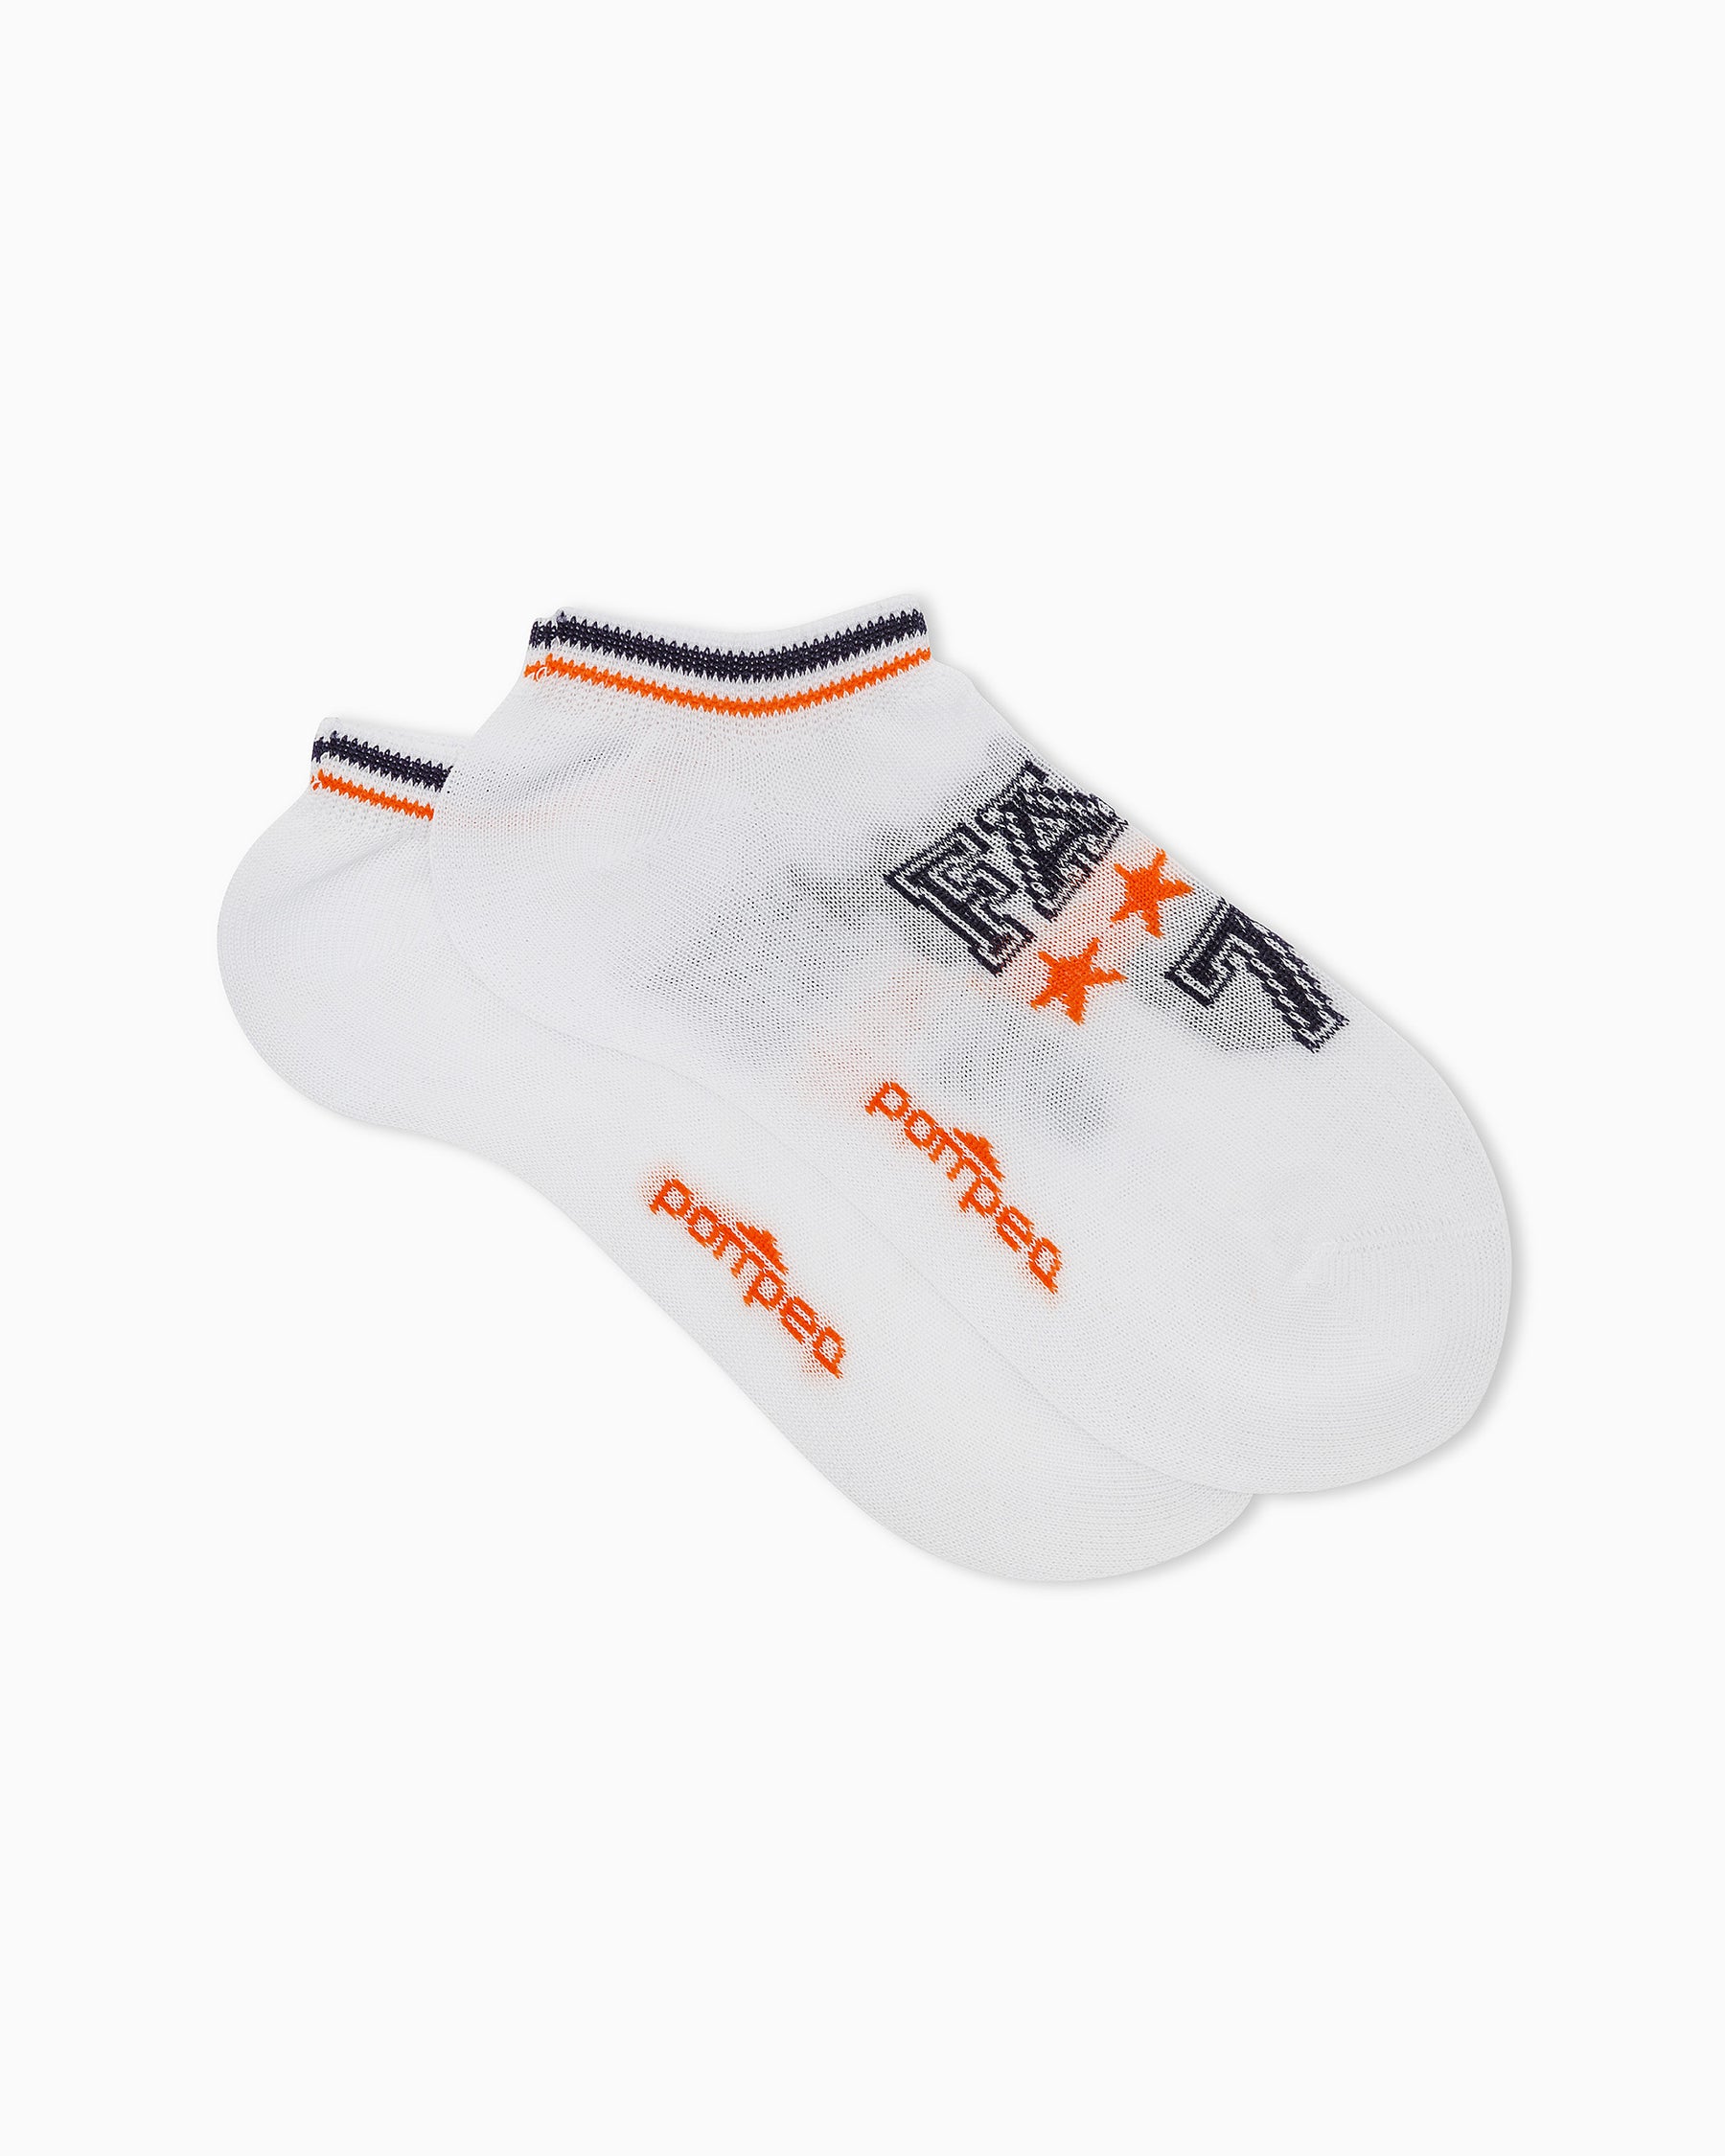 BOYS' RONDINE TRAINER LINERS 